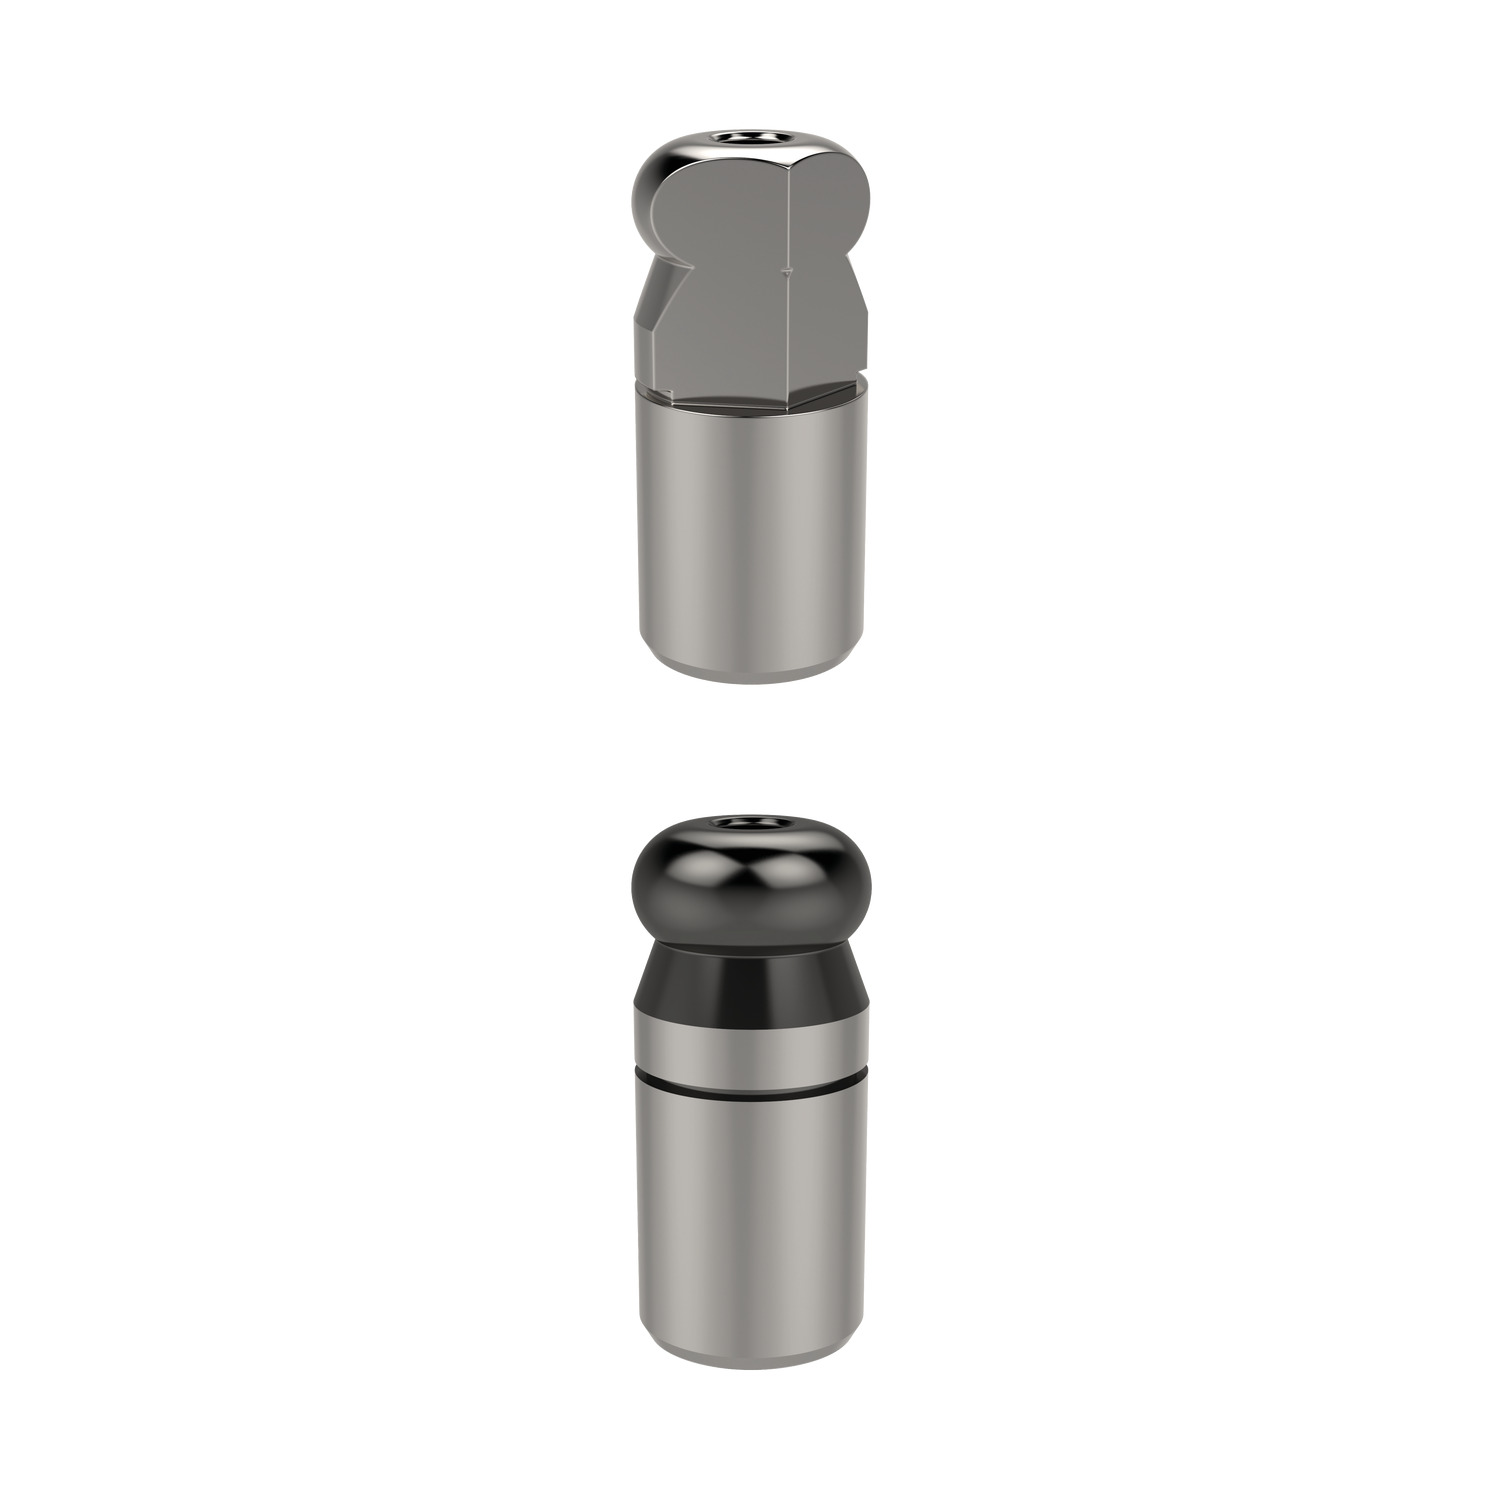 36341.W0580 Location Pins, Non-Stepped Stainless Steel - Plain - 20 - 20